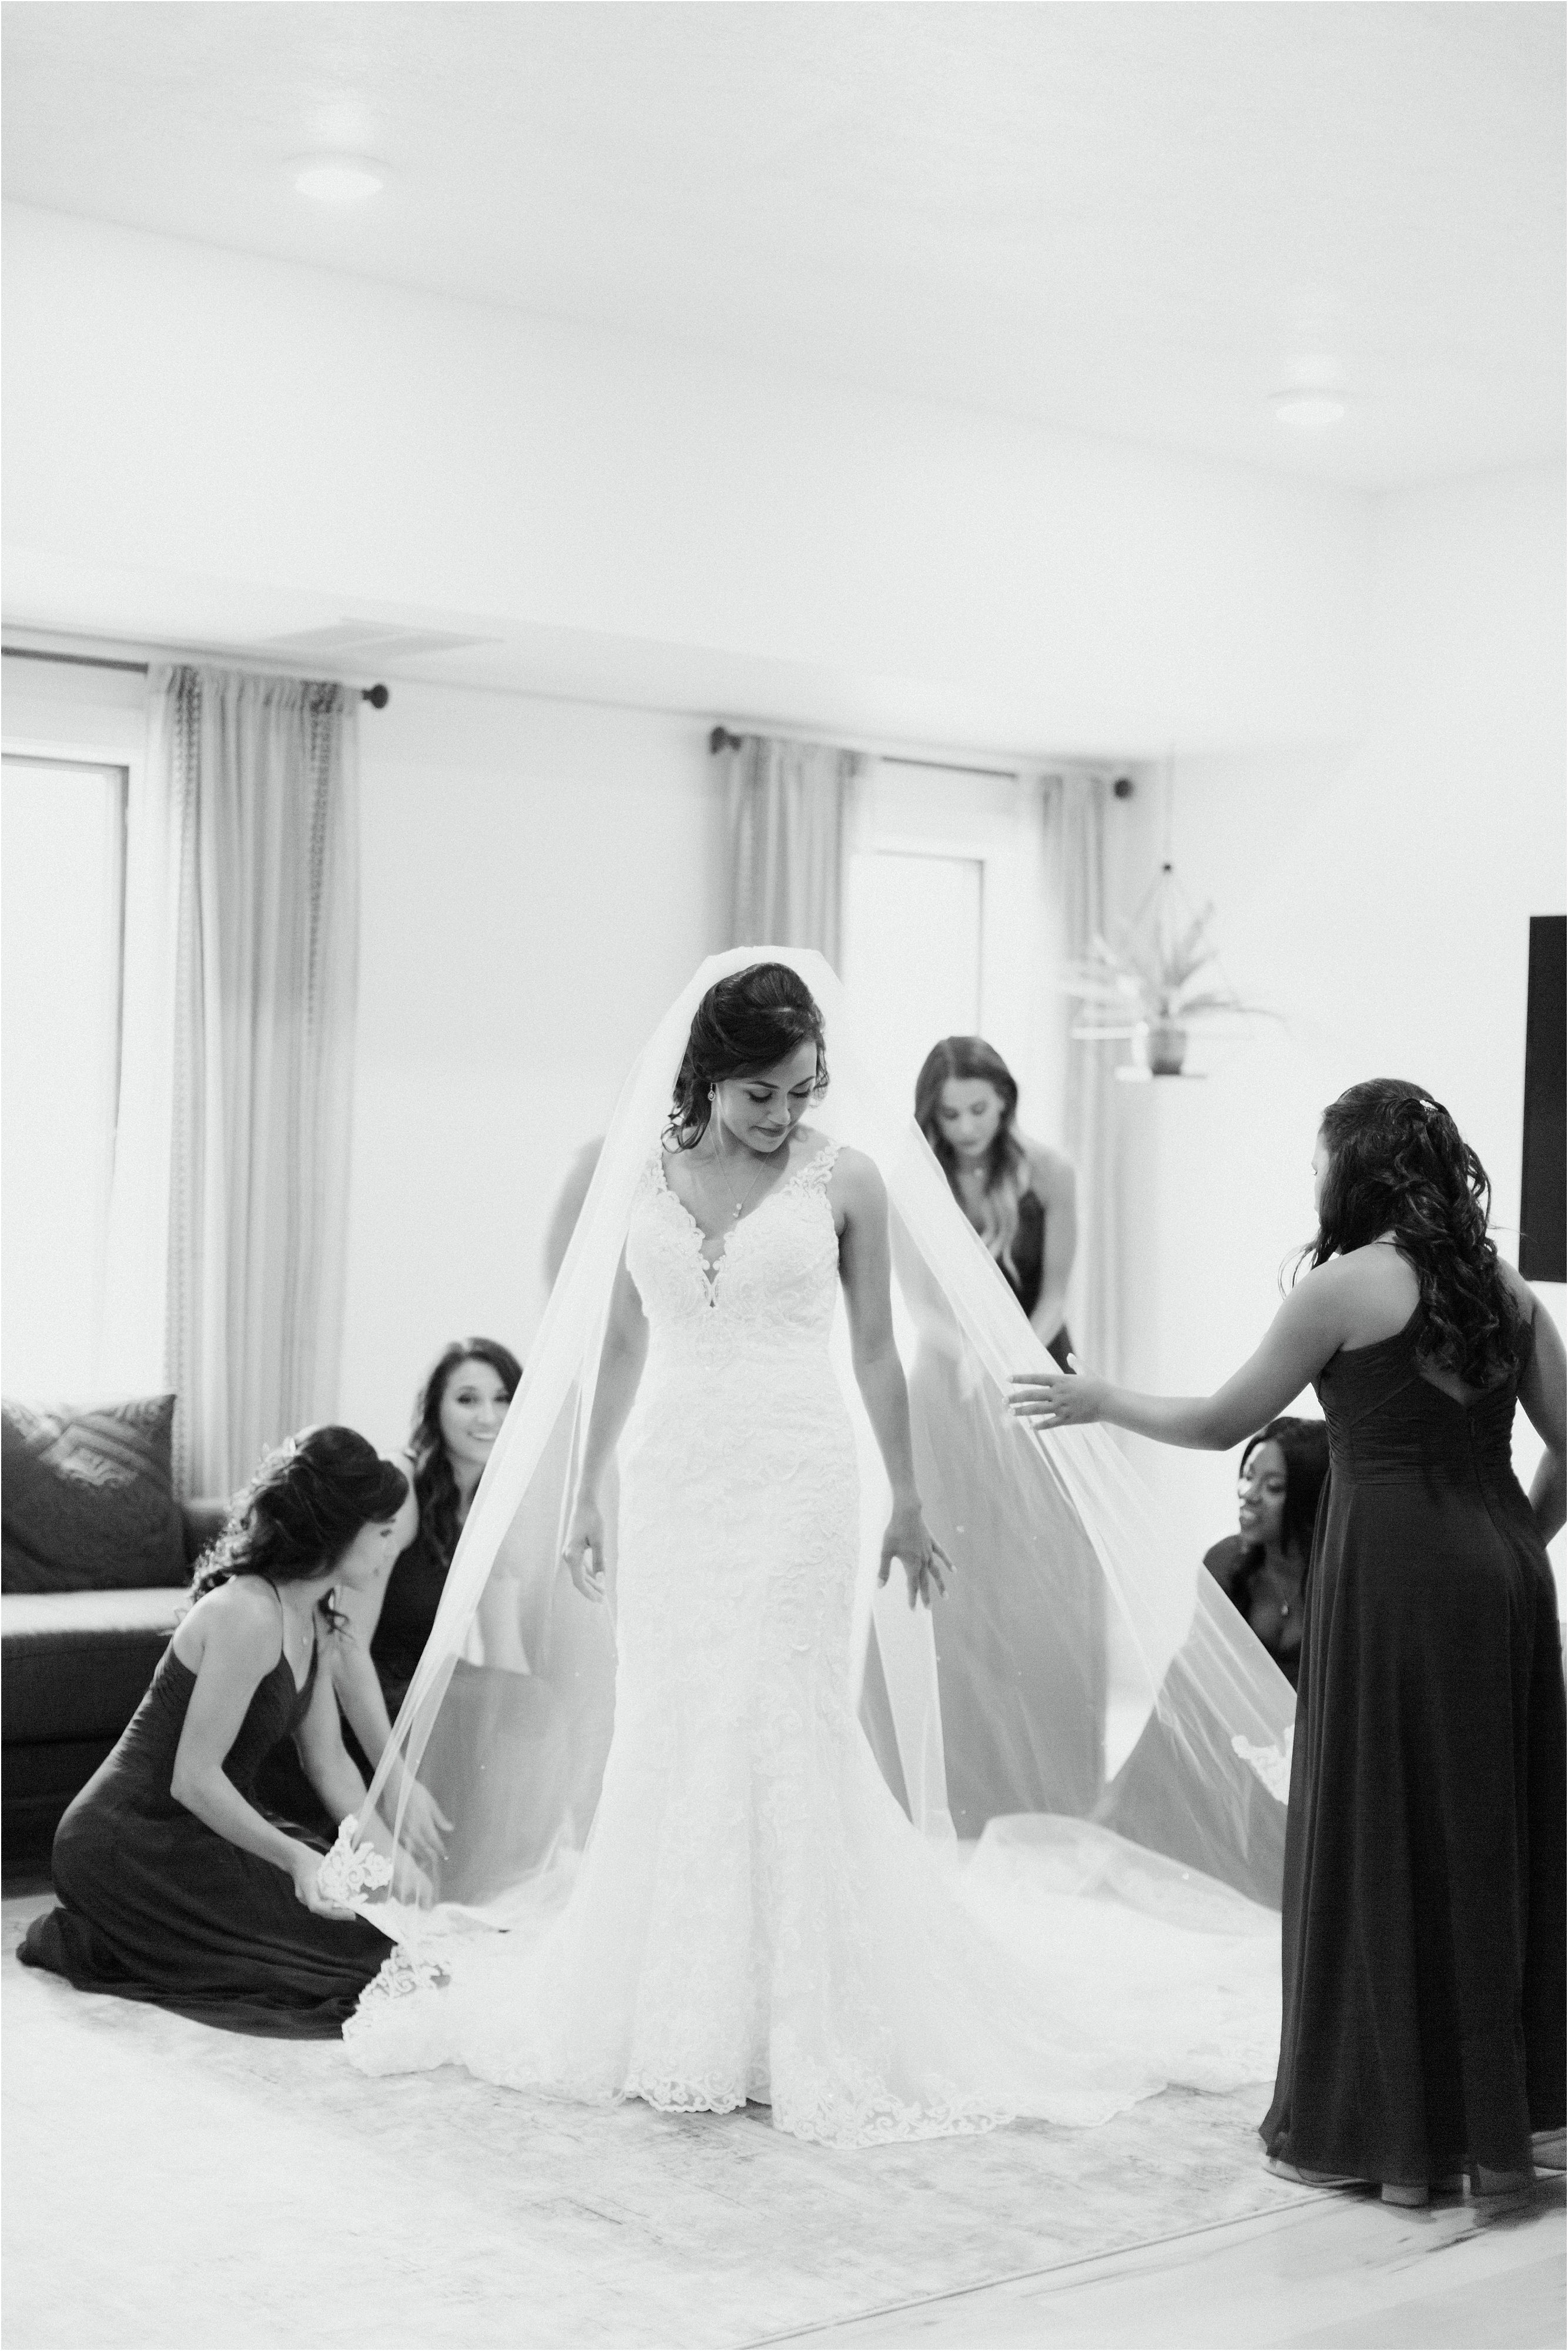 bridesmaids fixing bride's veil before ceremony at ariel pearl center